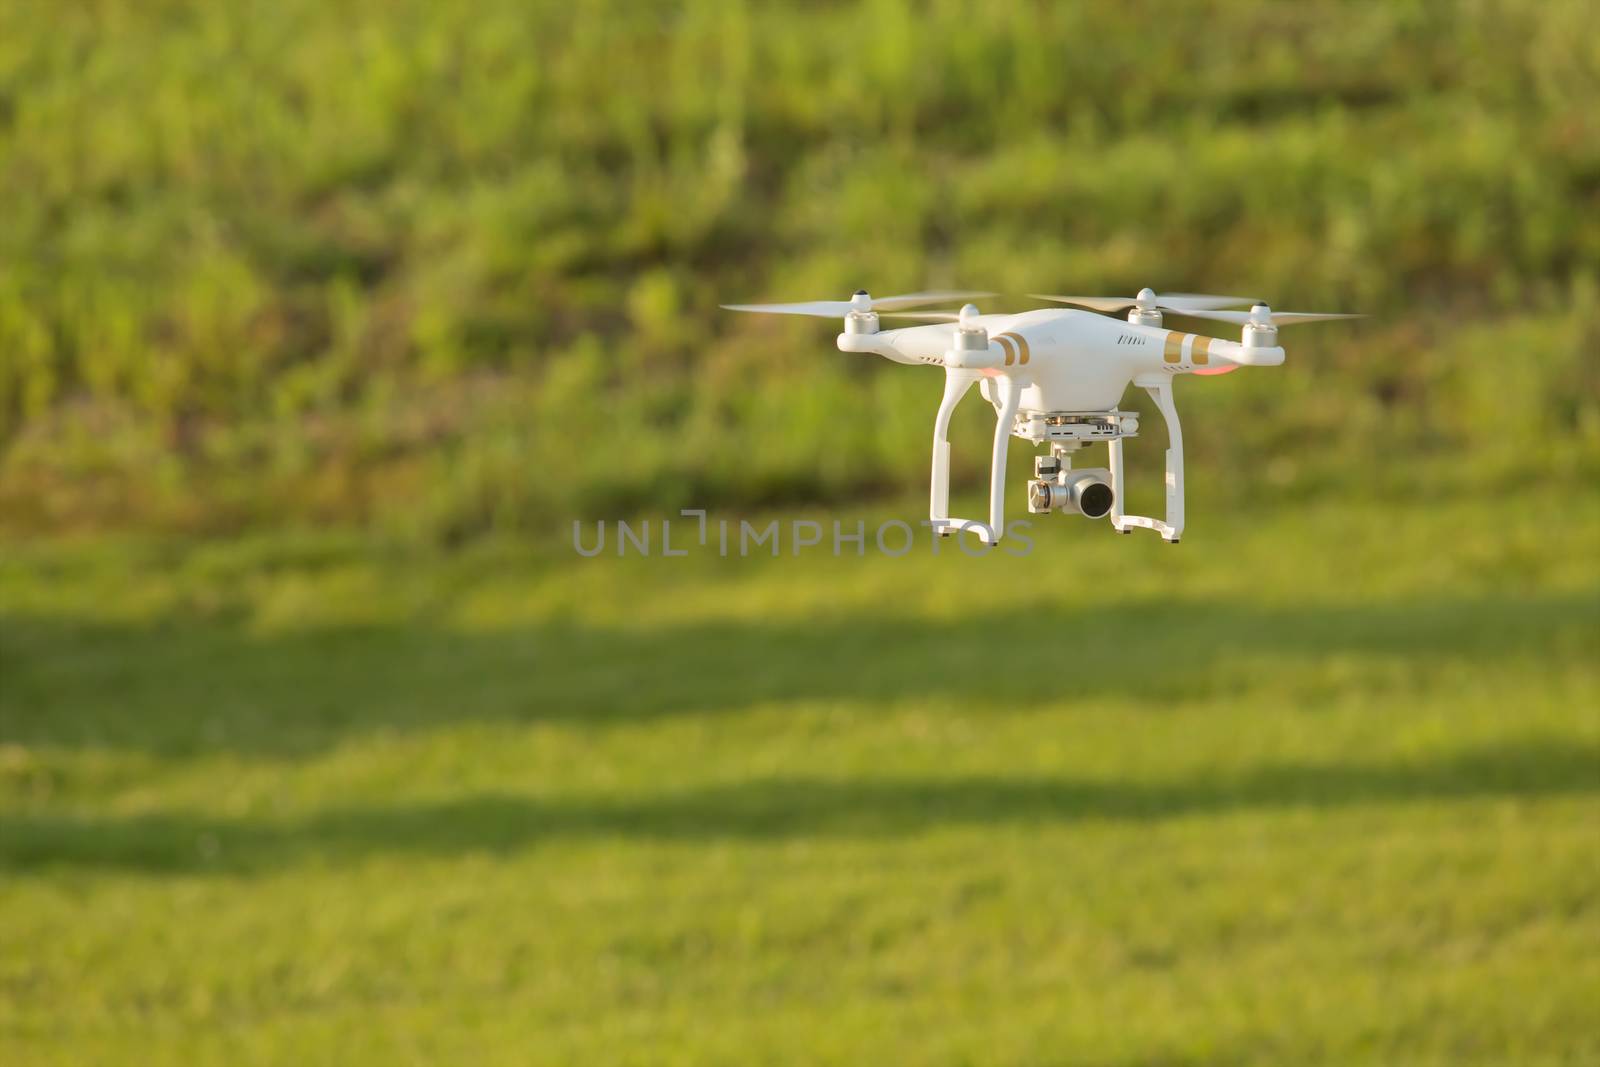 Remote control drone flying in mid air over a field